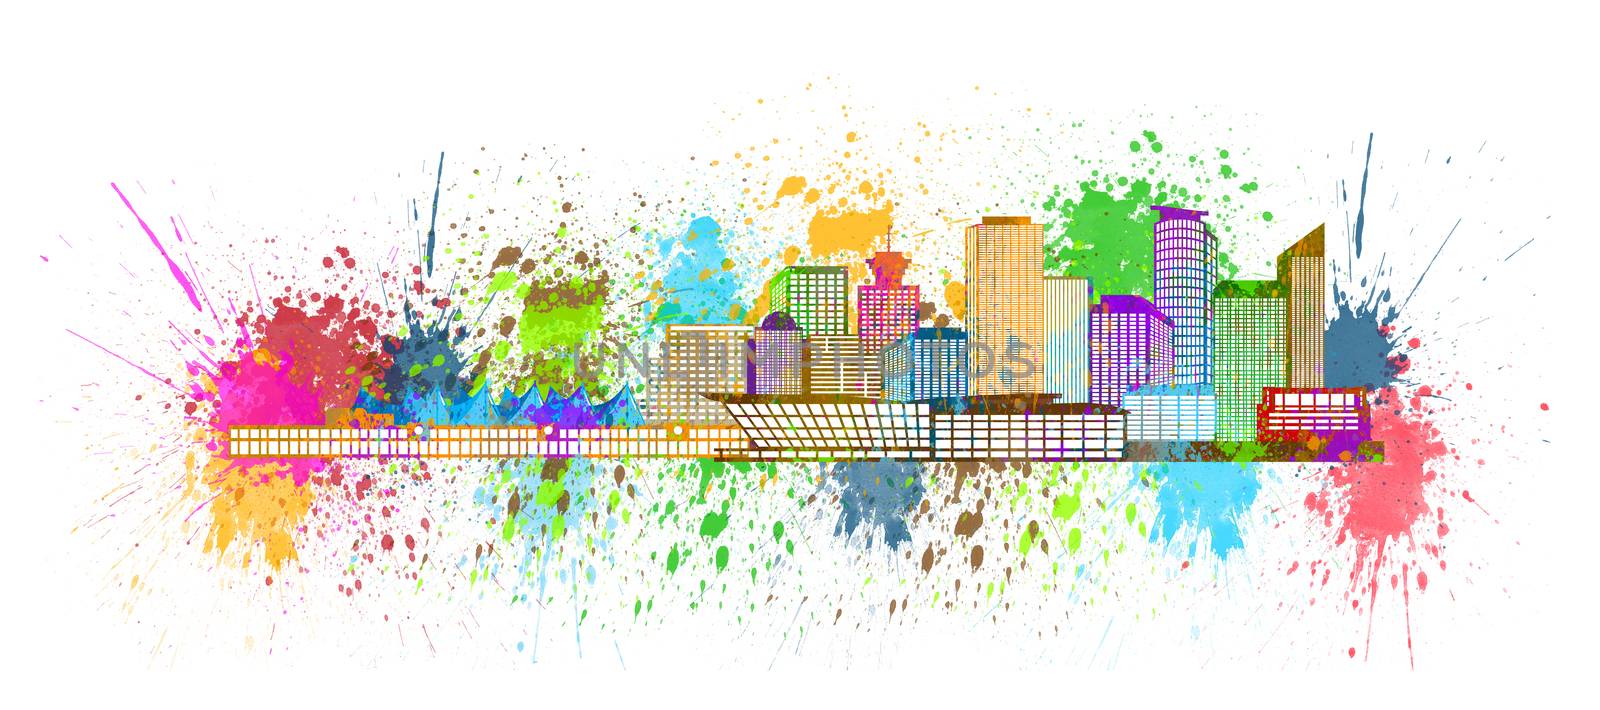 Vancouver British Columbia Canada City Skyline Paint Splatter Color Isolated on White Background Illustration